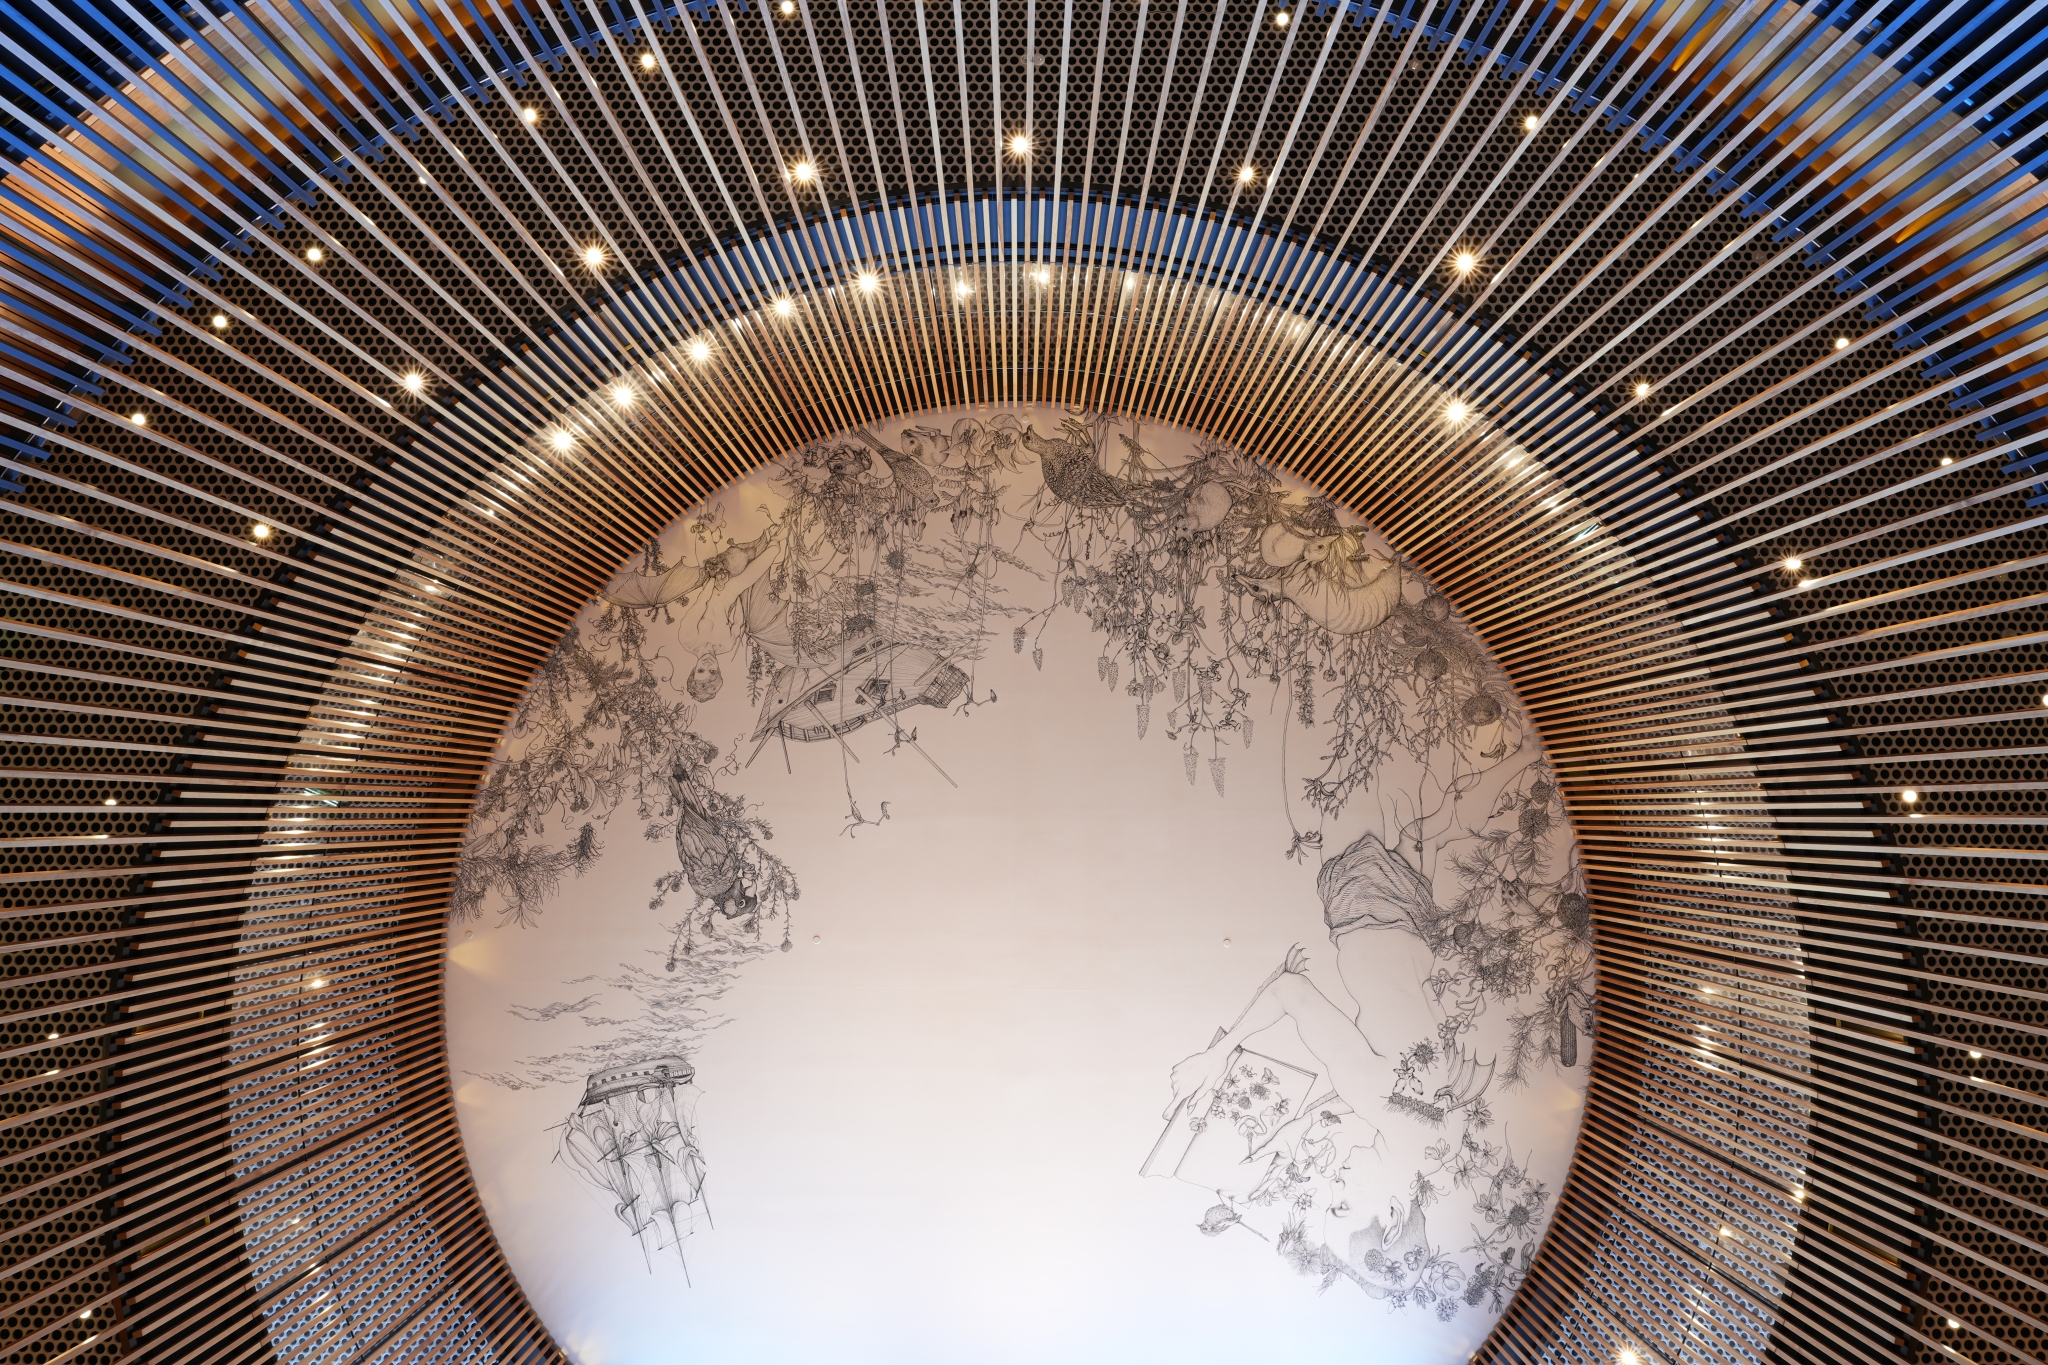 Illustrated ceiling in a circular design